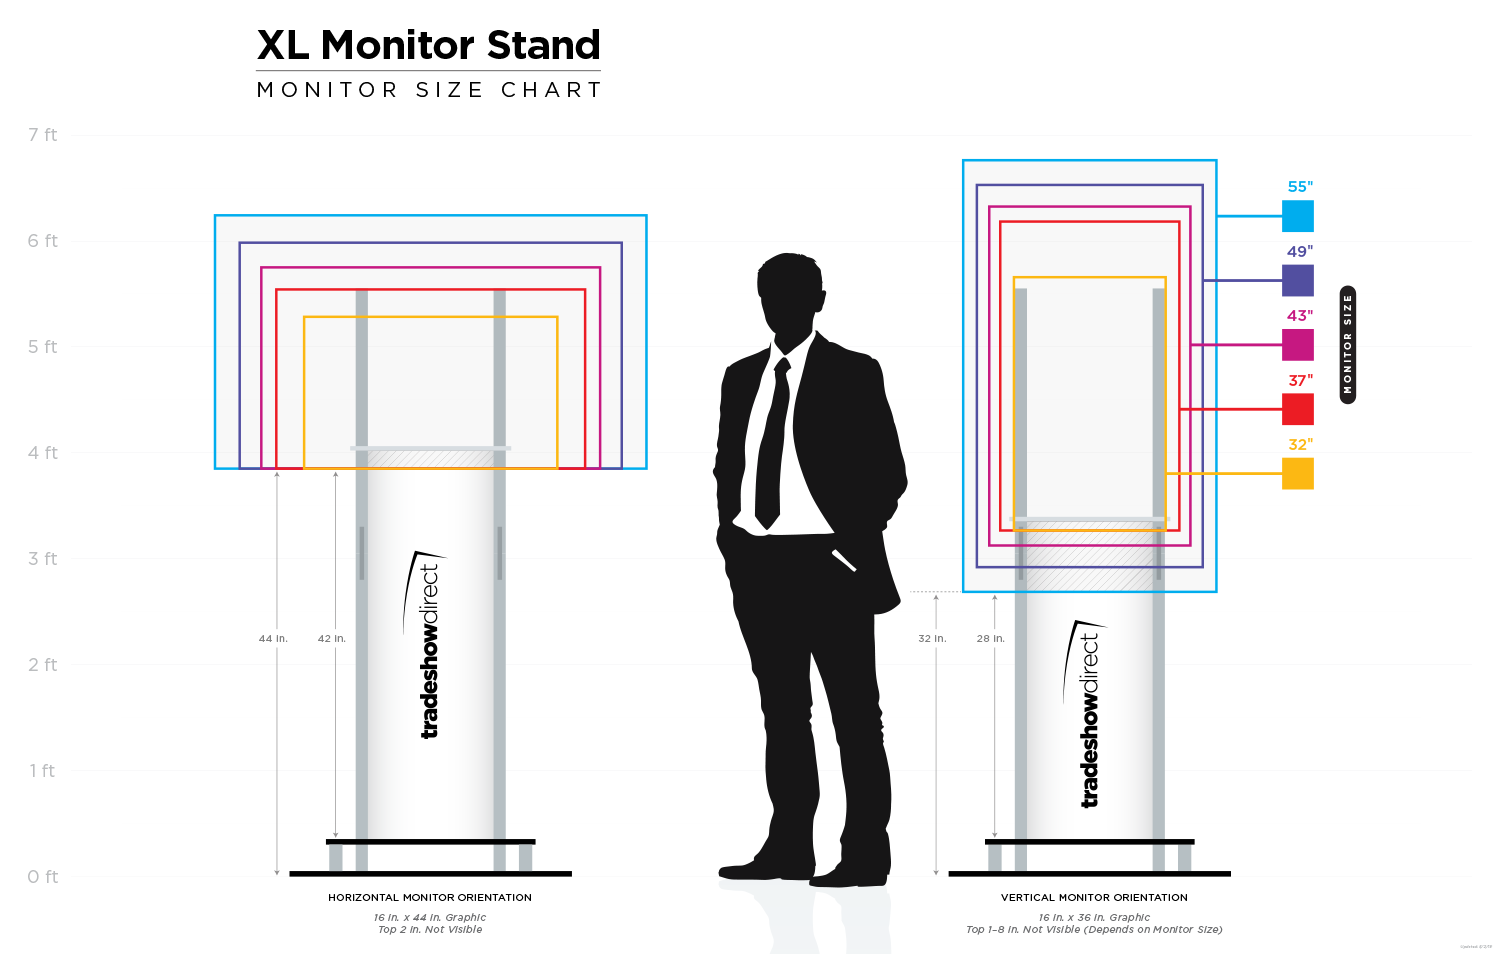 Chart Showing Various Monitor Sizes on the XL Monitor Stand